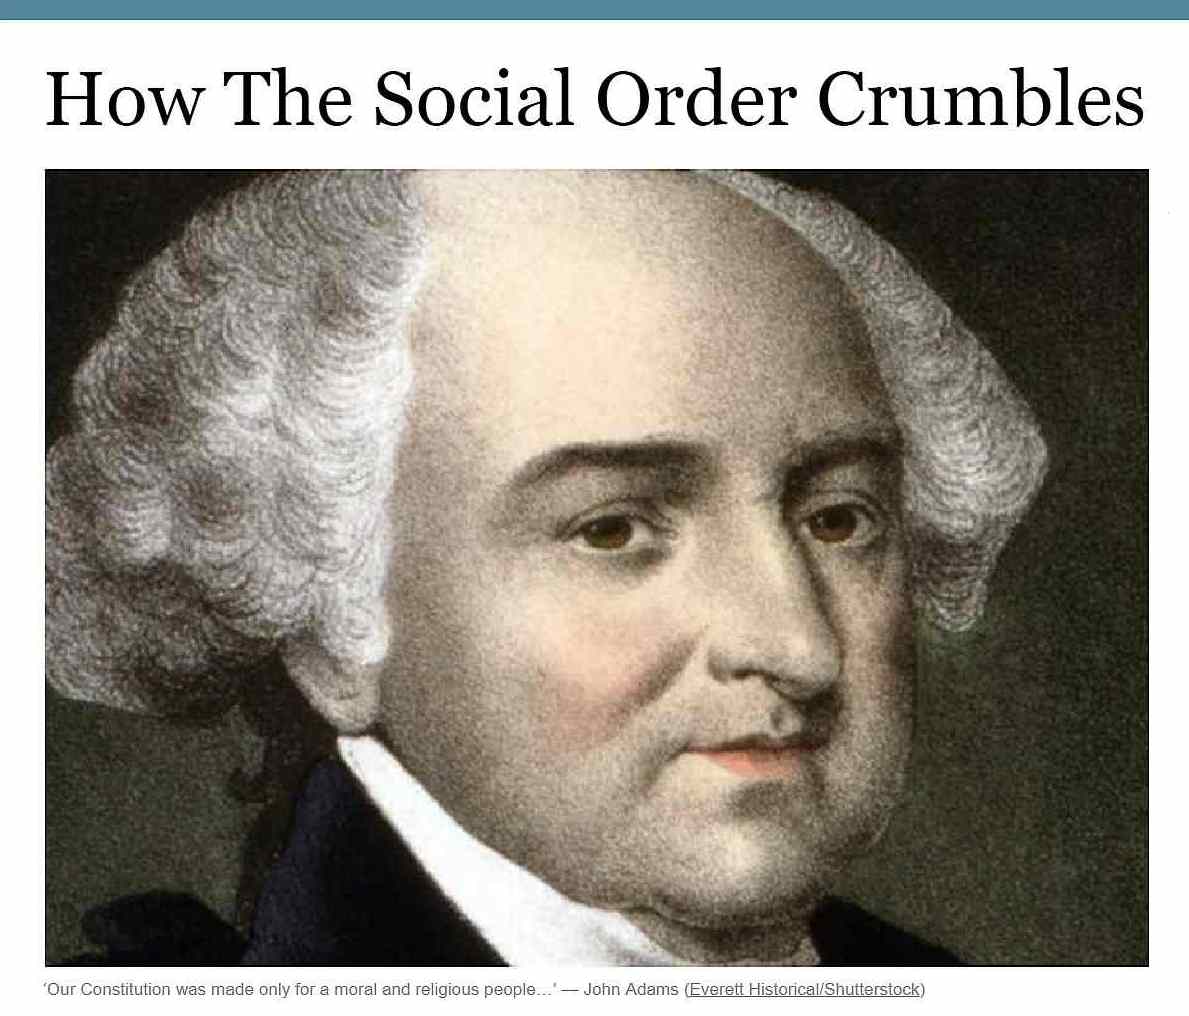 How The Social Order Crumbles